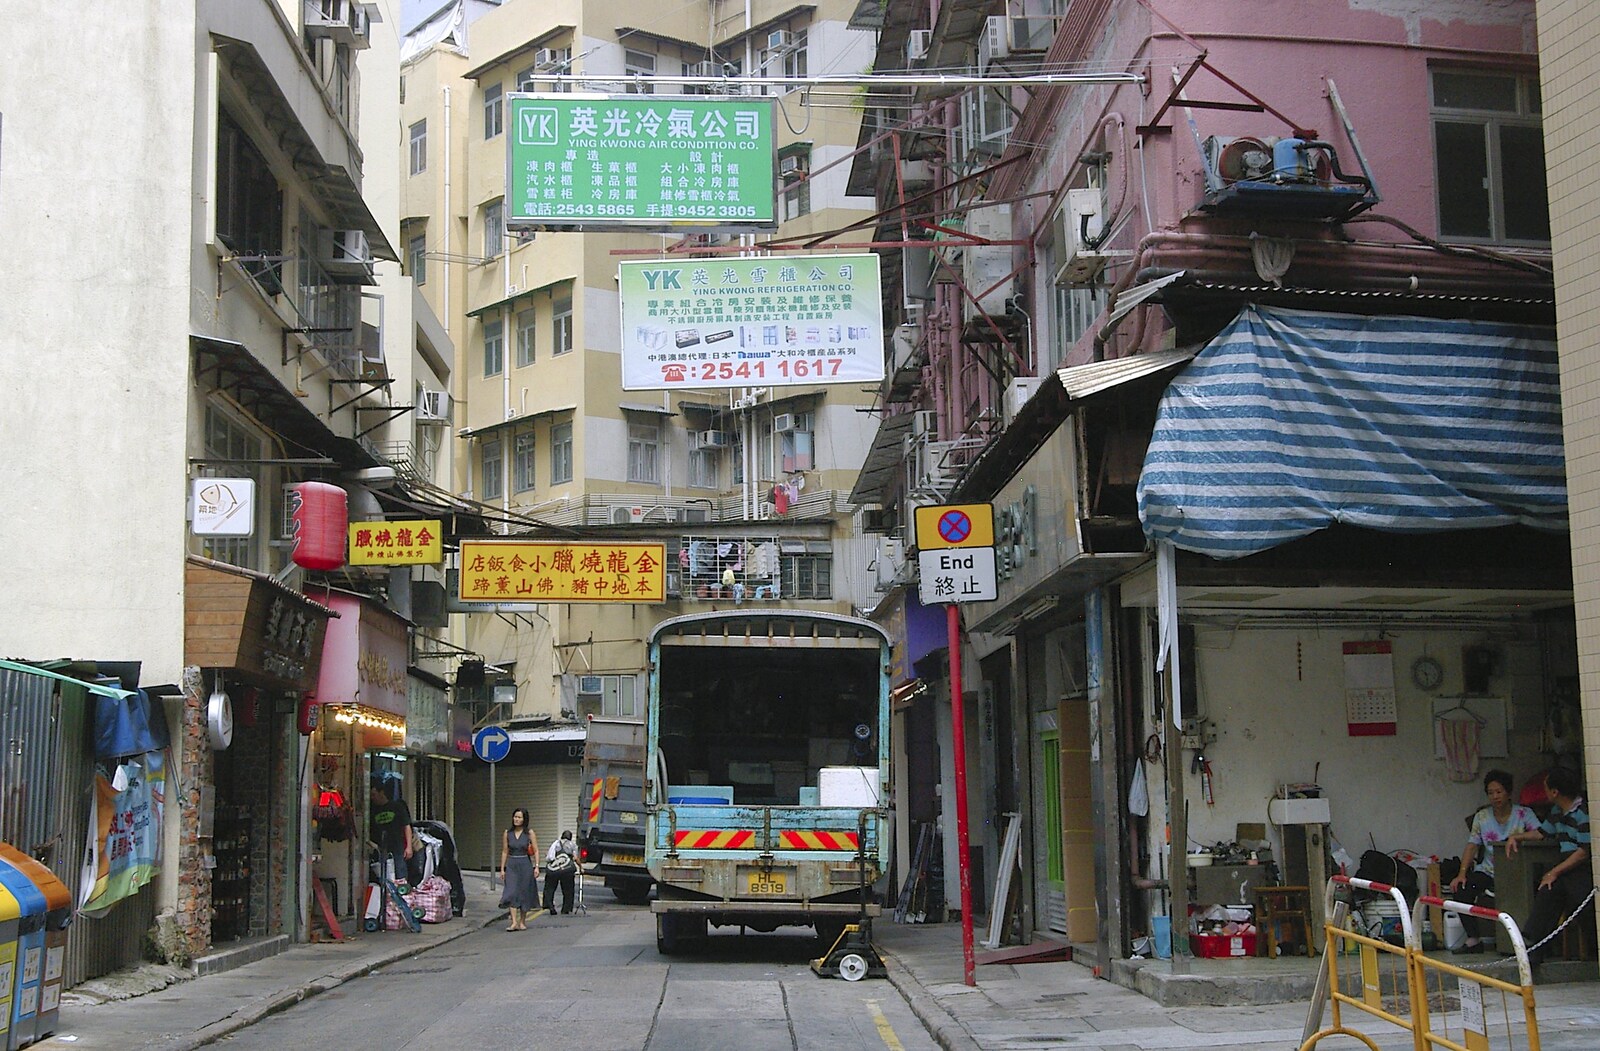 Delivery van on a side street from Lan Kwai Fong Market, Hong Kong, China - 4th October 2006